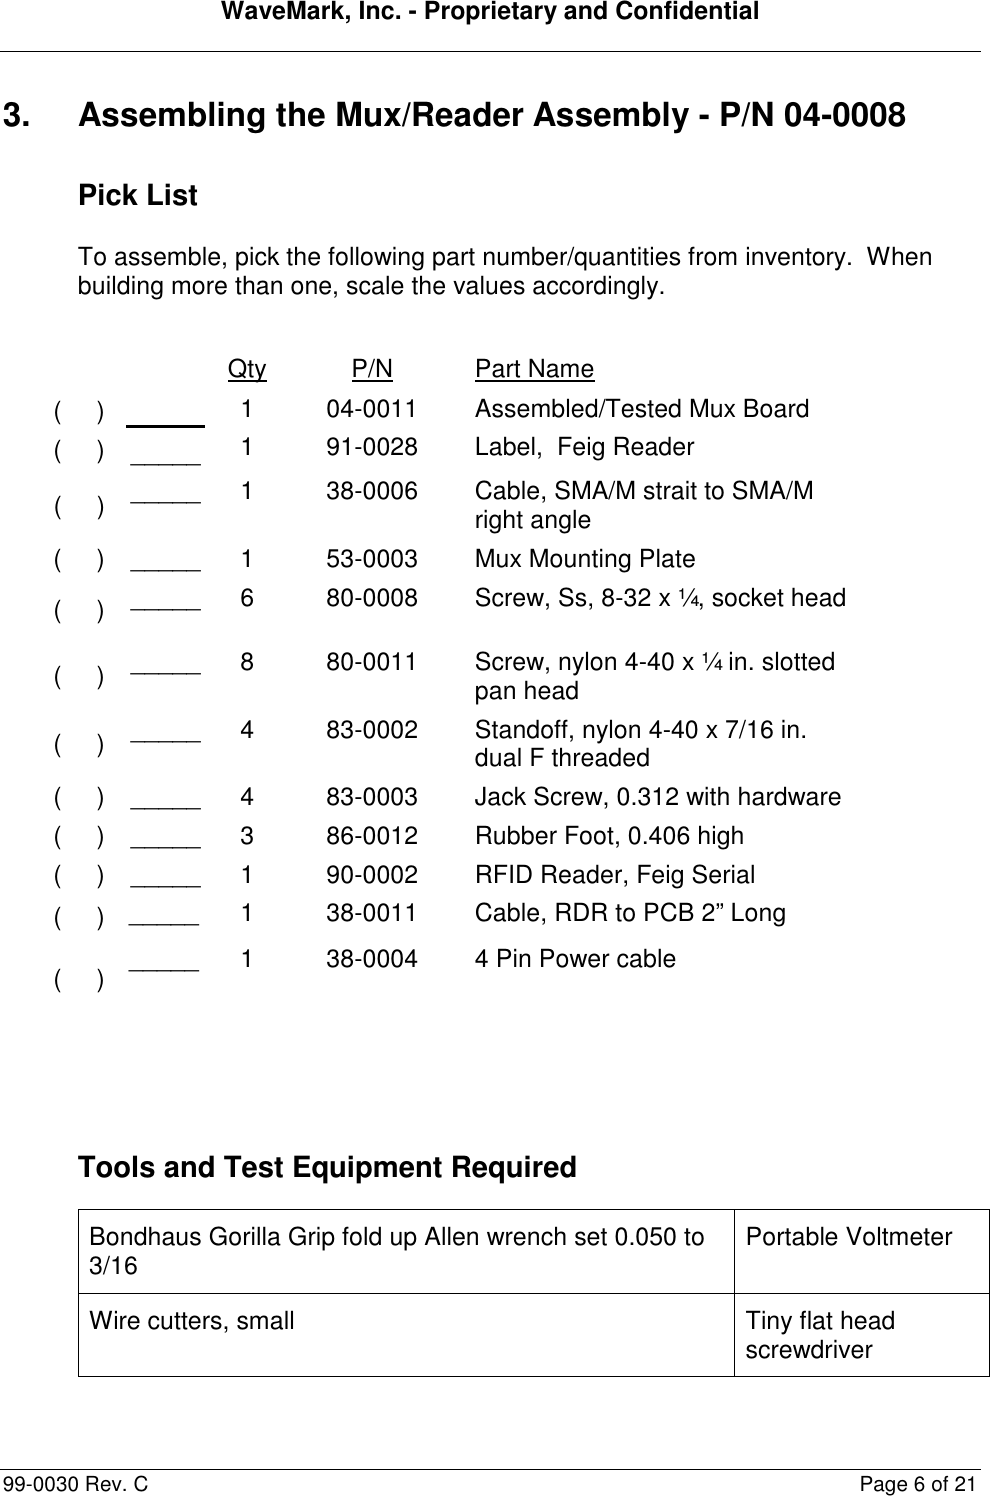 WaveMark, Inc. - Proprietary and Confidential  99-0030 Rev. C  Page 6 of 21 3.  Assembling the Mux/Reader Assembly - P/N 04-0008 Pick List To assemble, pick the following part number/quantities from inventory.  When building more than one, scale the values accordingly.      Qty  P/N  Part Name (     ) (     )  _____ 1 1 04-0011 91-0028 Assembled/Tested Mux Board Label,  Feig Reader (     ) _____ 1  38-0006  Cable, SMA/M strait to SMA/M right angle (     ) _____ 1  53-0003  Mux Mounting Plate (     ) _____ 6  80-0008  Screw, Ss, 8-32 x ¼, socket head (     ) _____ 8  80-0011  Screw, nylon 4-40 x ¼ in. slotted pan head (     ) _____ 4  83-0002  Standoff, nylon 4-40 x 7/16 in. dual F threaded (     ) _____ 4  83-0003  Jack Screw, 0.312 with hardware (     ) _____ 3  86-0012  Rubber Foot, 0.406 high (     ) _____ 1  90-0002  RFID Reader, Feig Serial (     ) _____  1  38-0011  Cable, RDR to PCB 2” Long (     ) _____  1  38-0004  4 Pin Power cable   Tools and Test Equipment Required Bondhaus Gorilla Grip fold up Allen wrench set 0.050 to 3/16  Portable Voltmeter Wire cutters, small  Tiny flat head screwdriver 